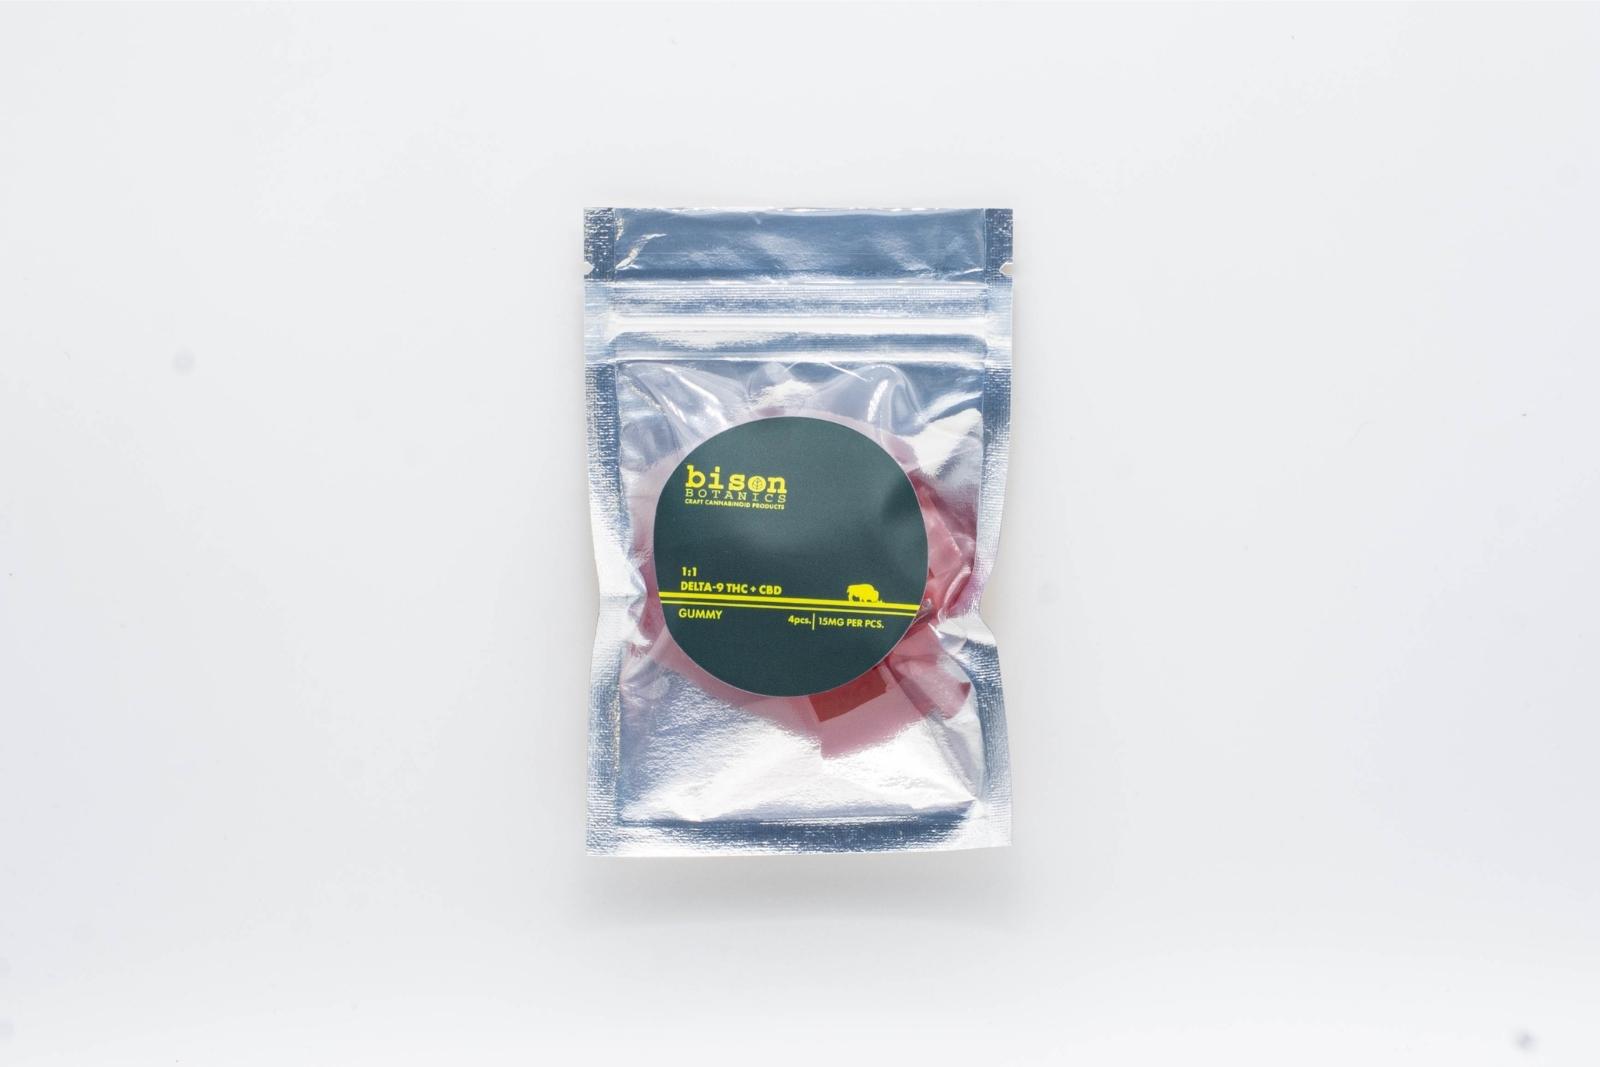 A 4-pack bag of 1:1 Delta-9 THC gummies by Bison Botanics, on a white background